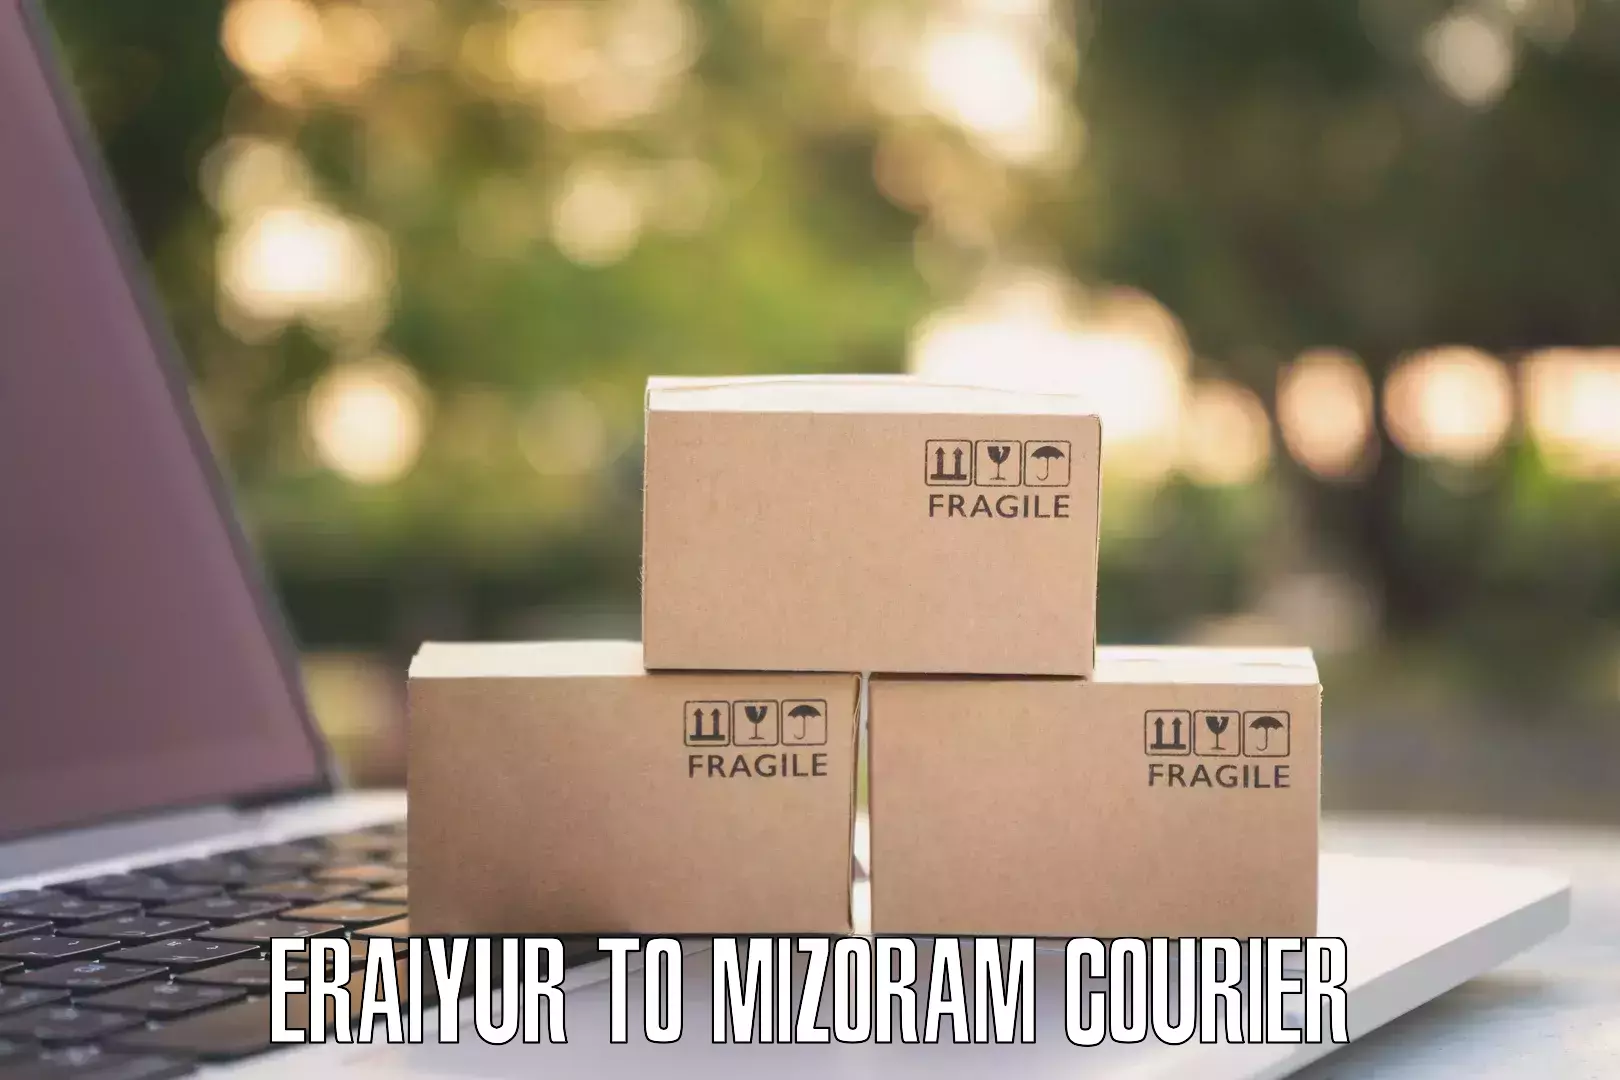 On-demand courier in Eraiyur to Siaha